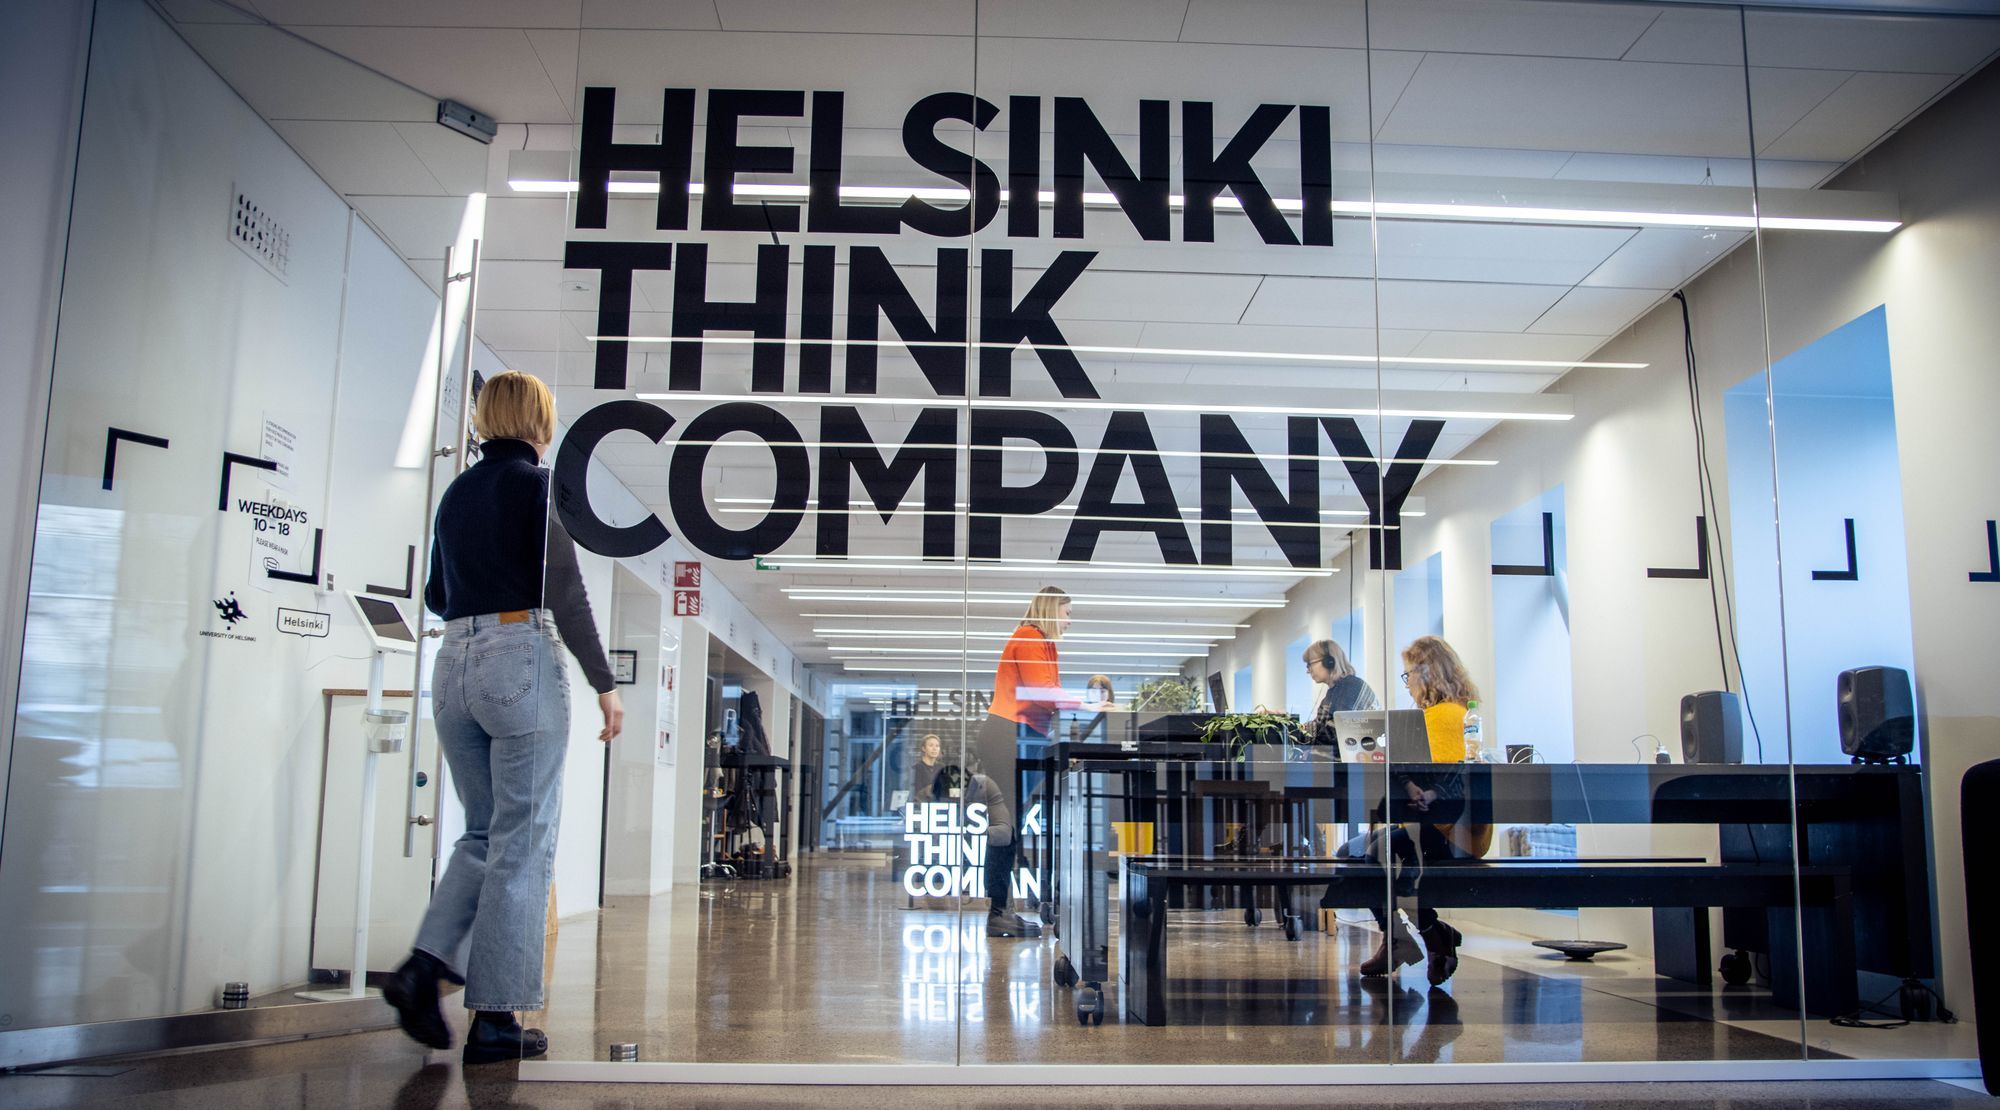 Digital 52 4️⃣7️⃣ - On supporting students and researchers through coworking spaces: the story of Helsinki Think Company.